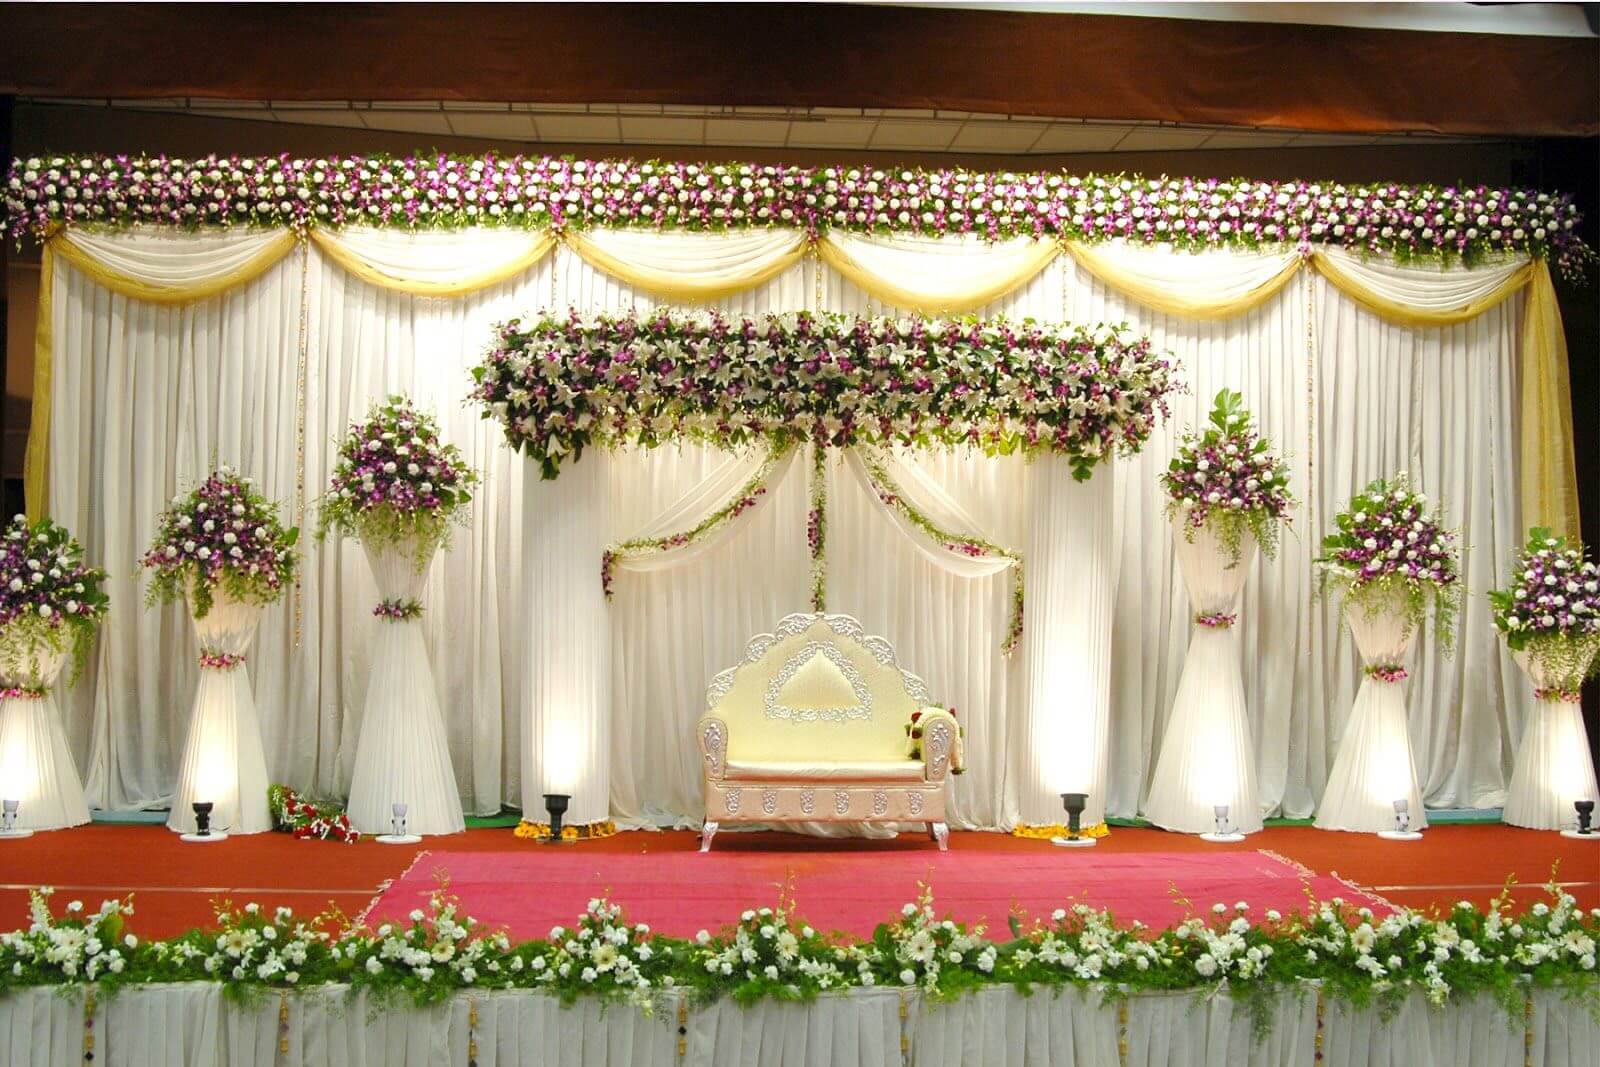 A wedding stage decorated with flowers and greenery
